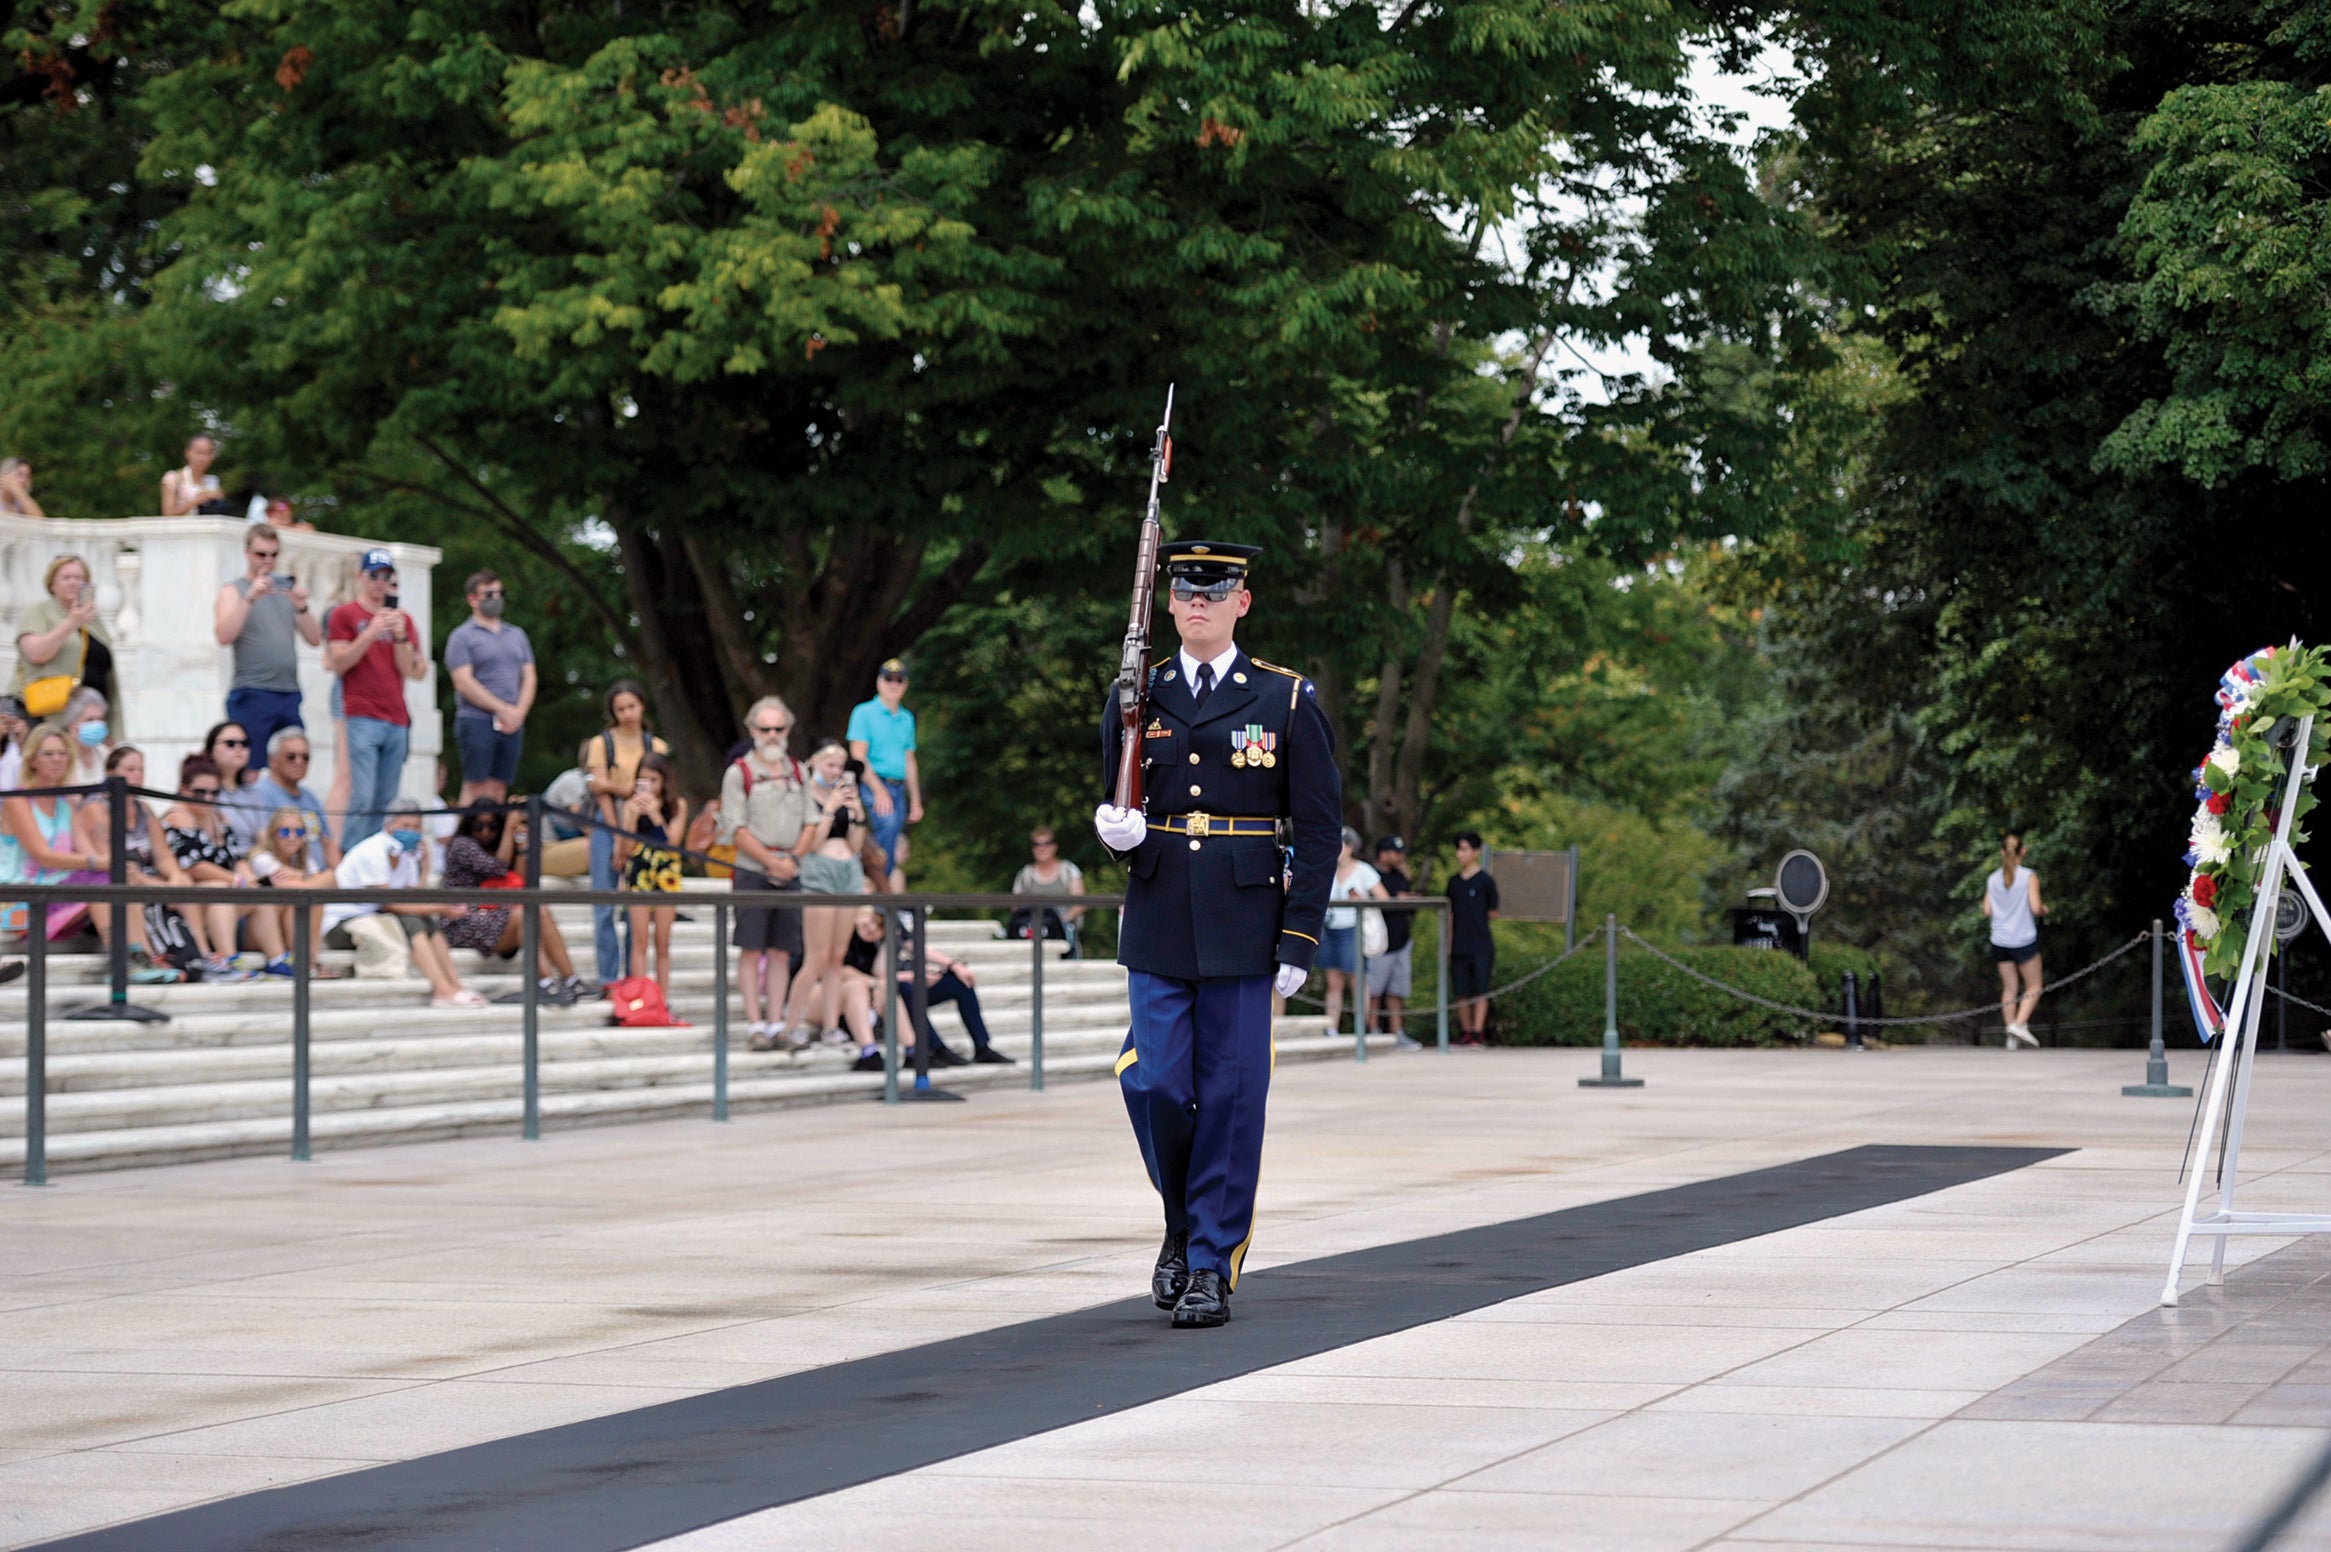 Spc. Brendan Meier on duty at the Tomb of the Unknown Soldier